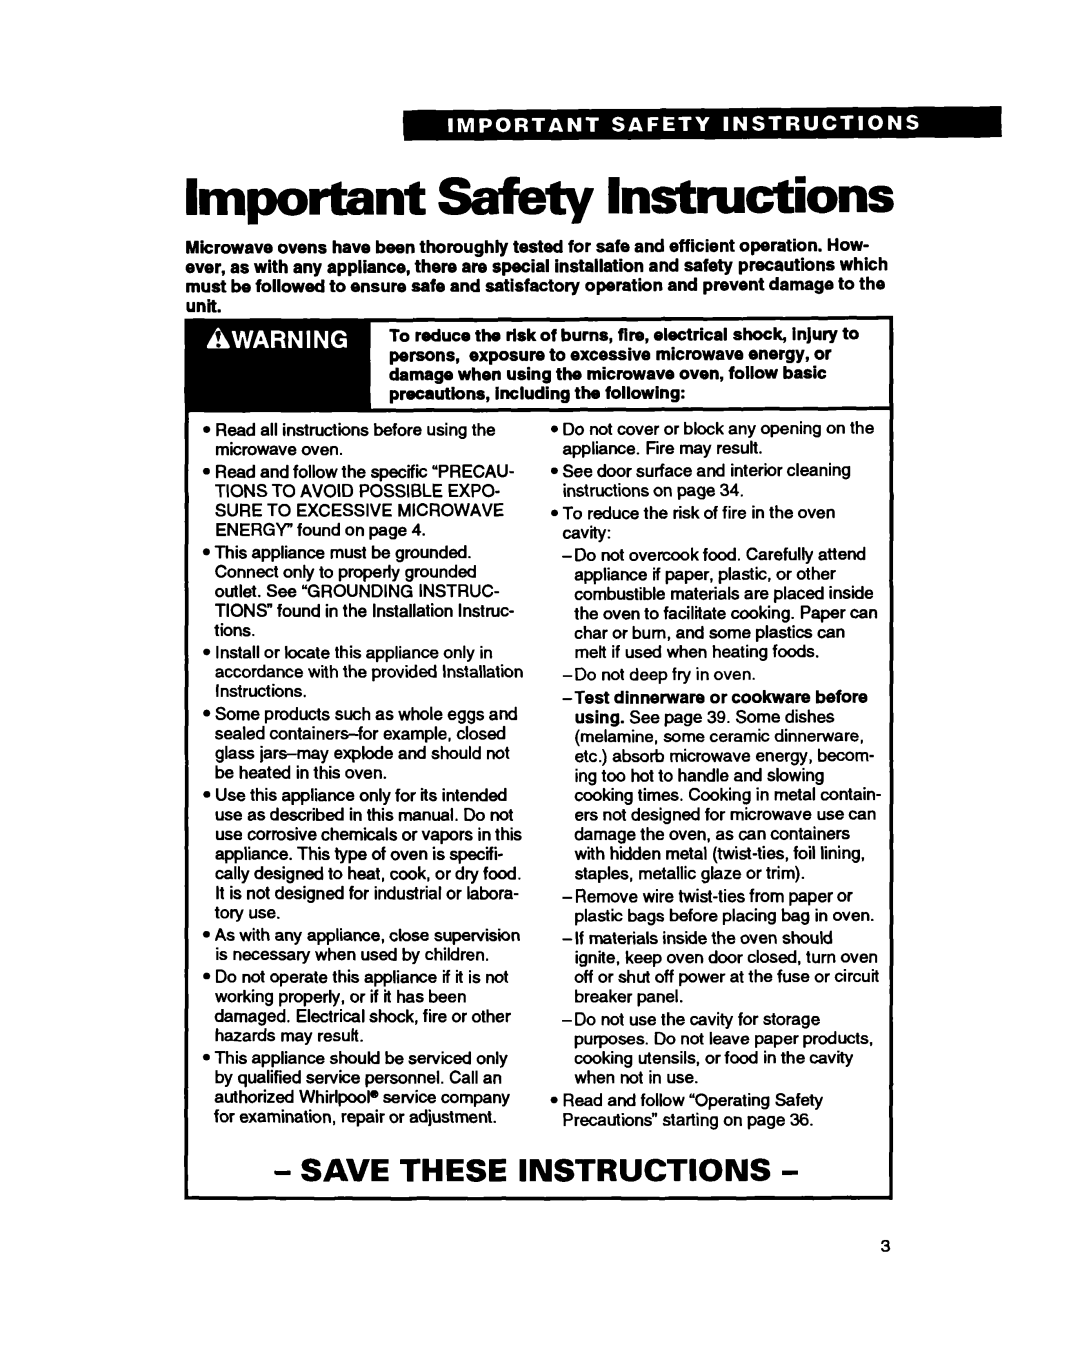 Whirlpool RM280PXB warranty Important Safety Instructions 